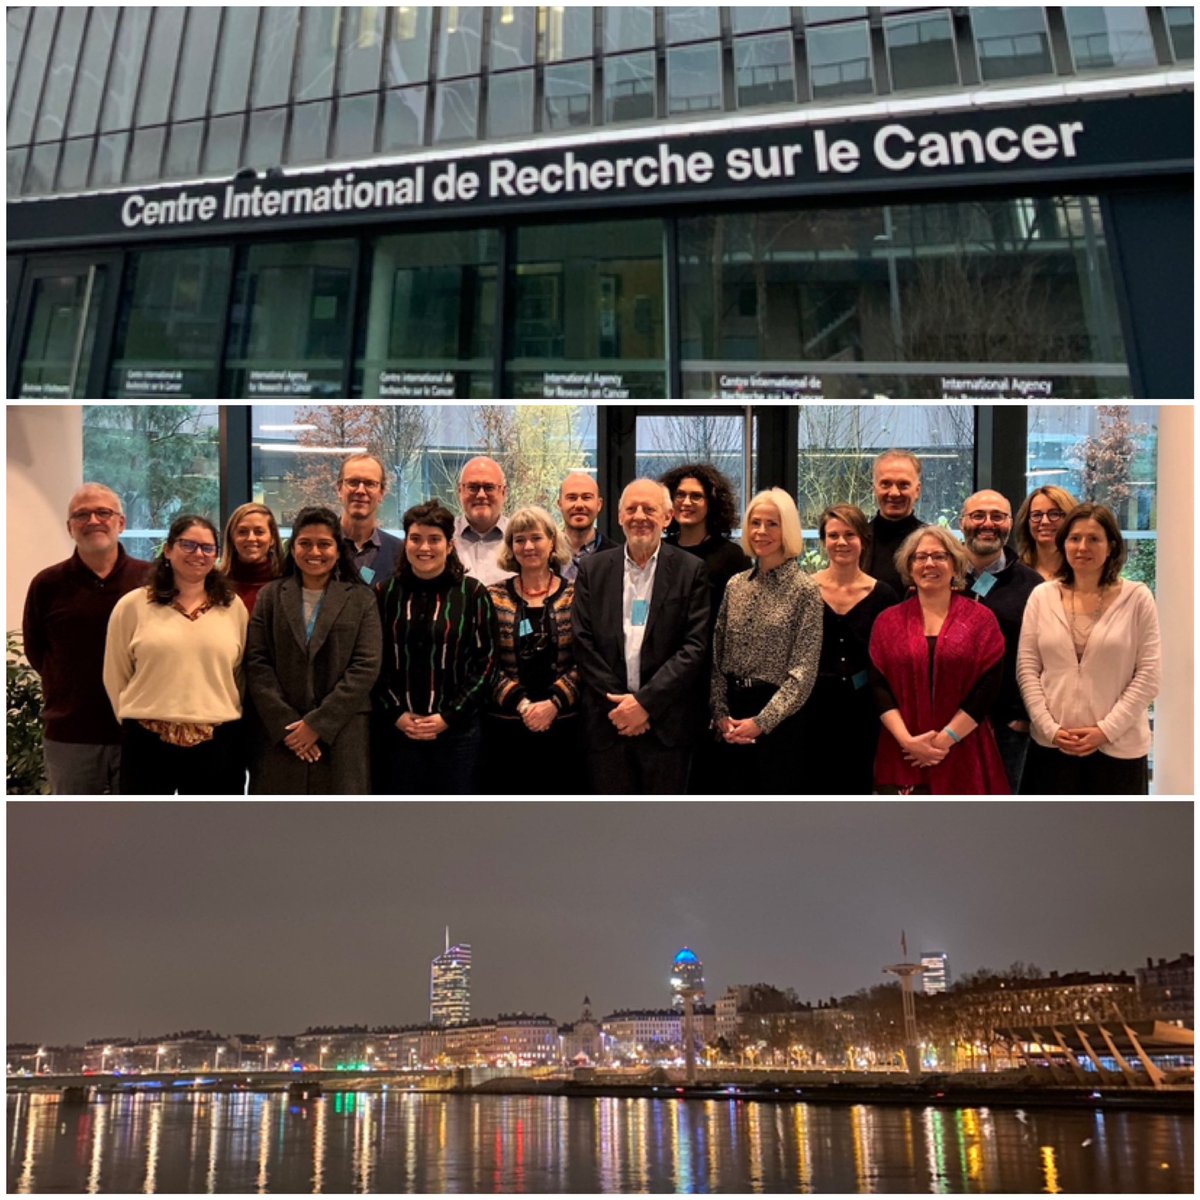 Always a pleasure to spend good working moments at @IARCWHO #Lyon! These days discussing lifestyles for the European Code Against Cancer @cancercode #ECAC5. De luxe working group with #ElioRiboli #JoachimShuz #CarolinaEspina @AriadnaFeliu #DavidRitchie @LindaBauld et al.